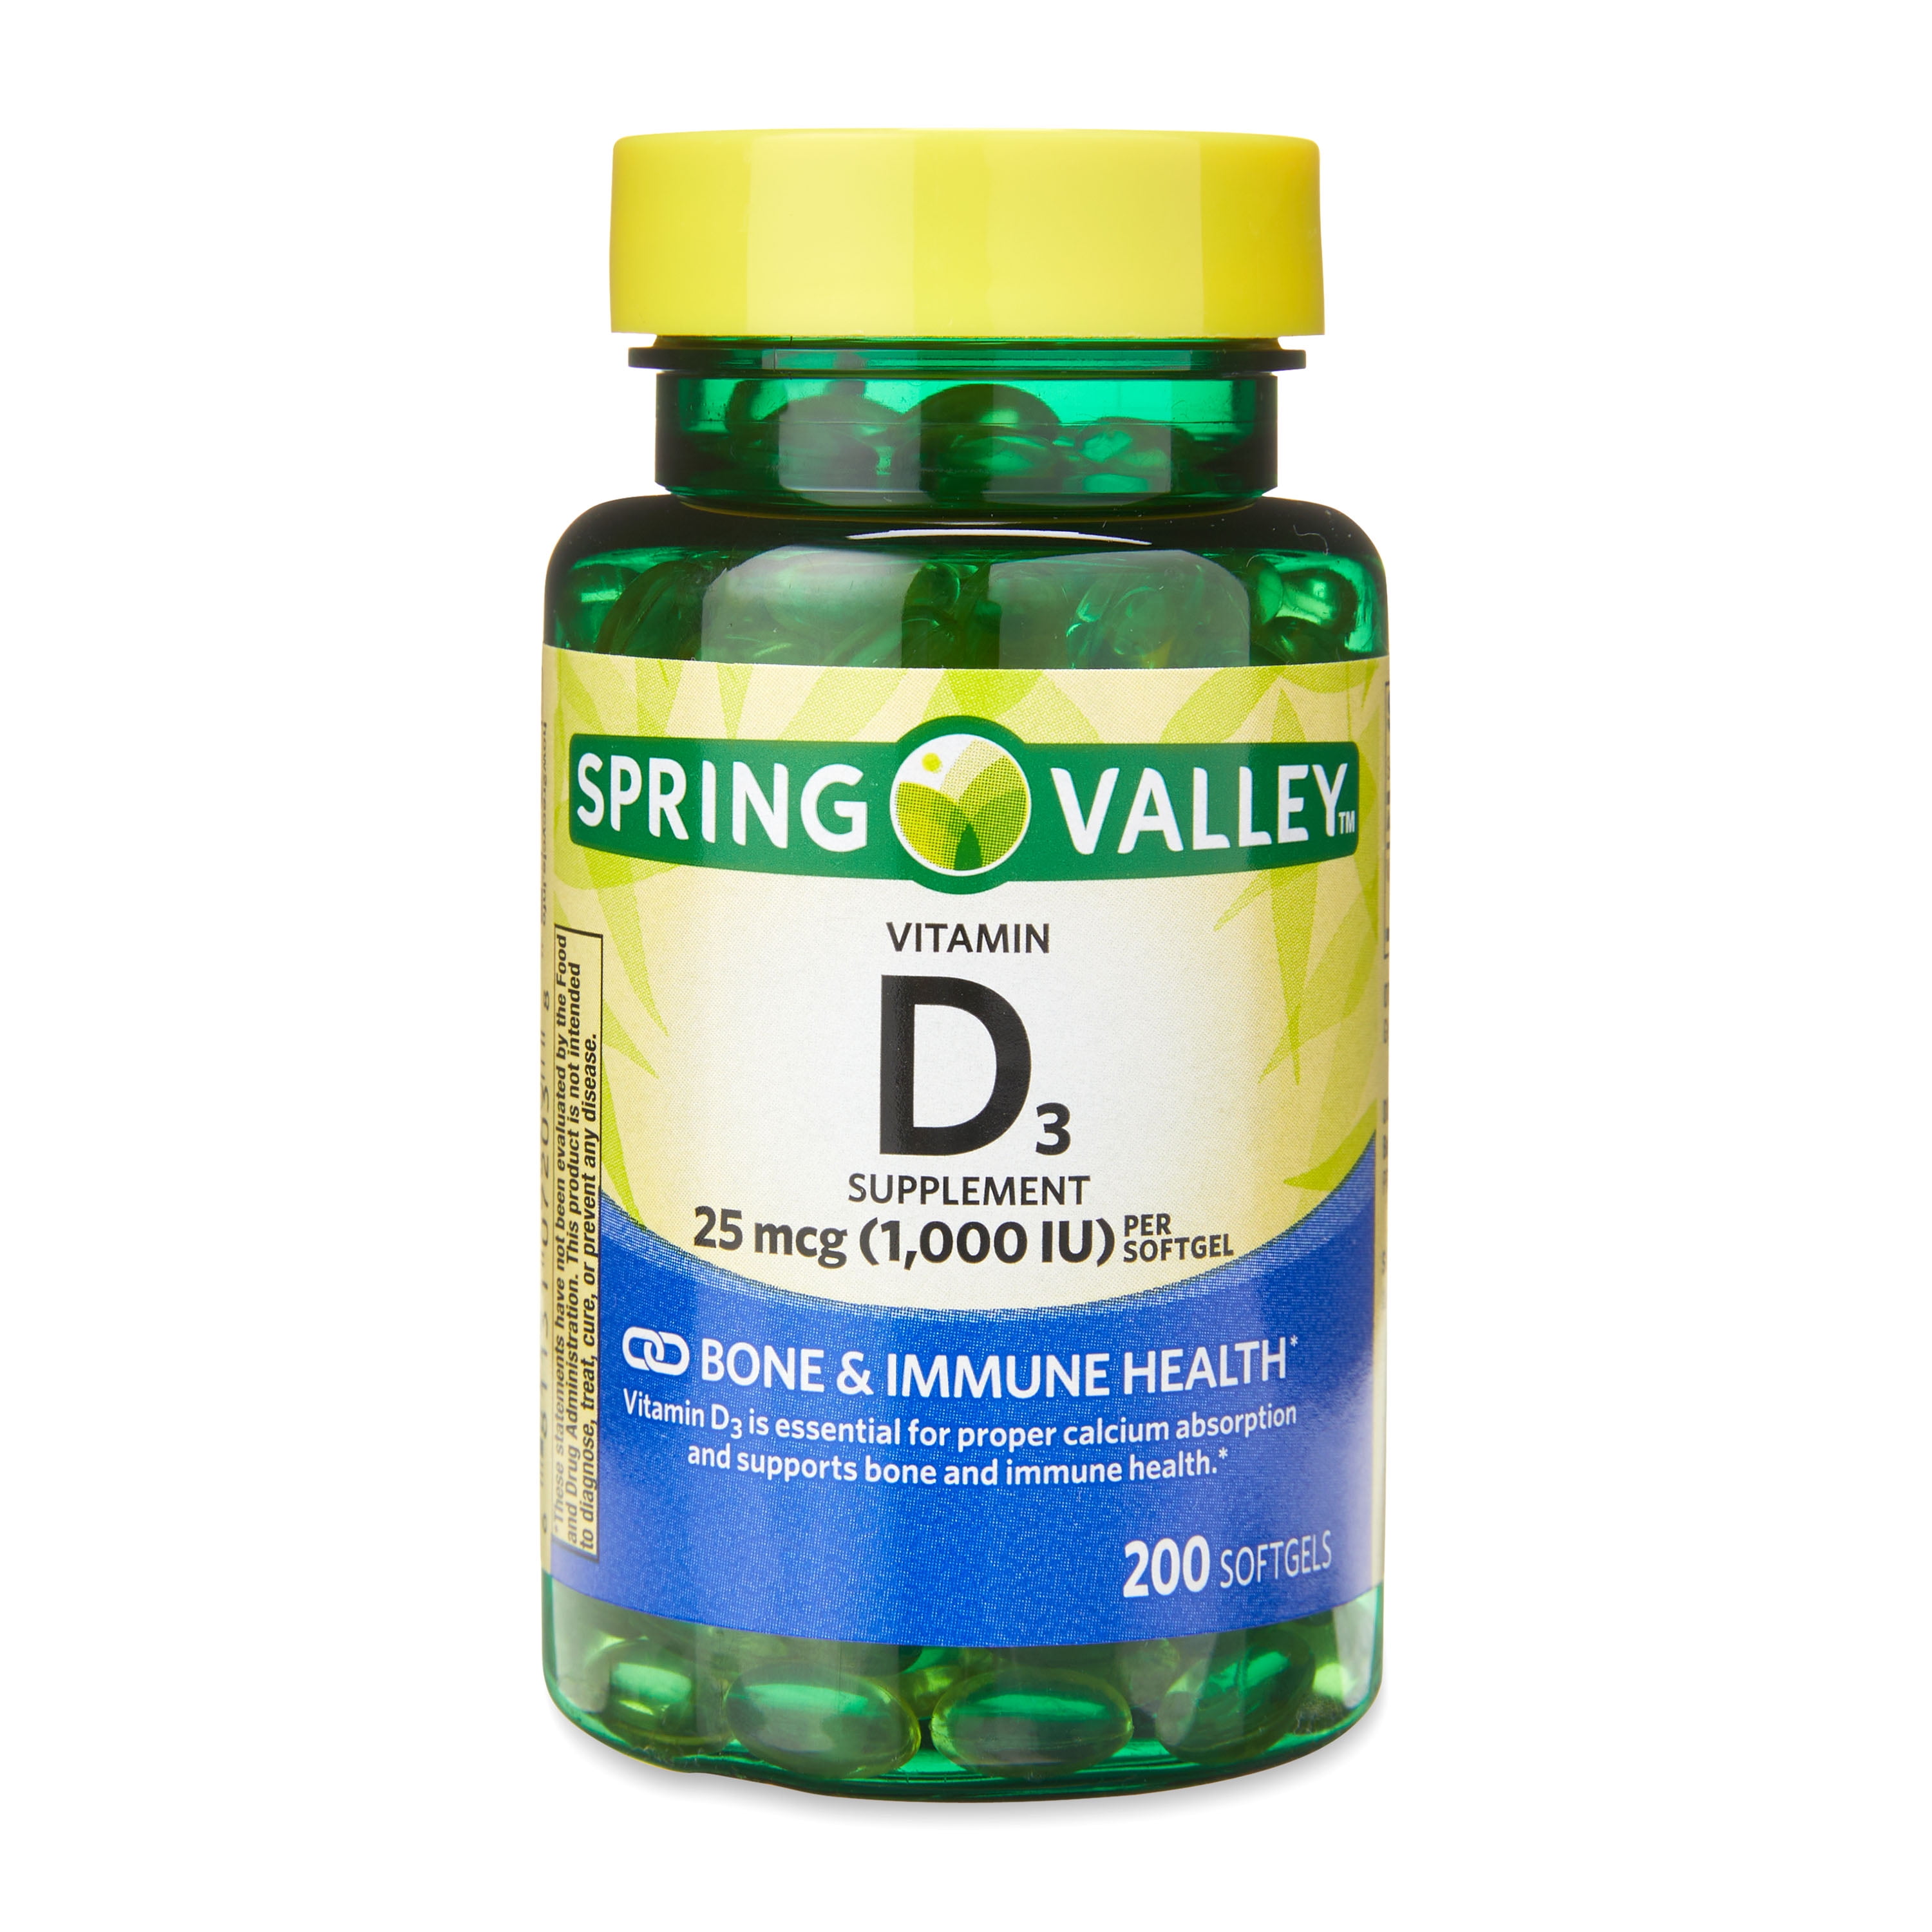 Spring Valley Vitamin D3, 25 Mcg (1,000 IU) Softgels, 200 Count, Dietary Supplement